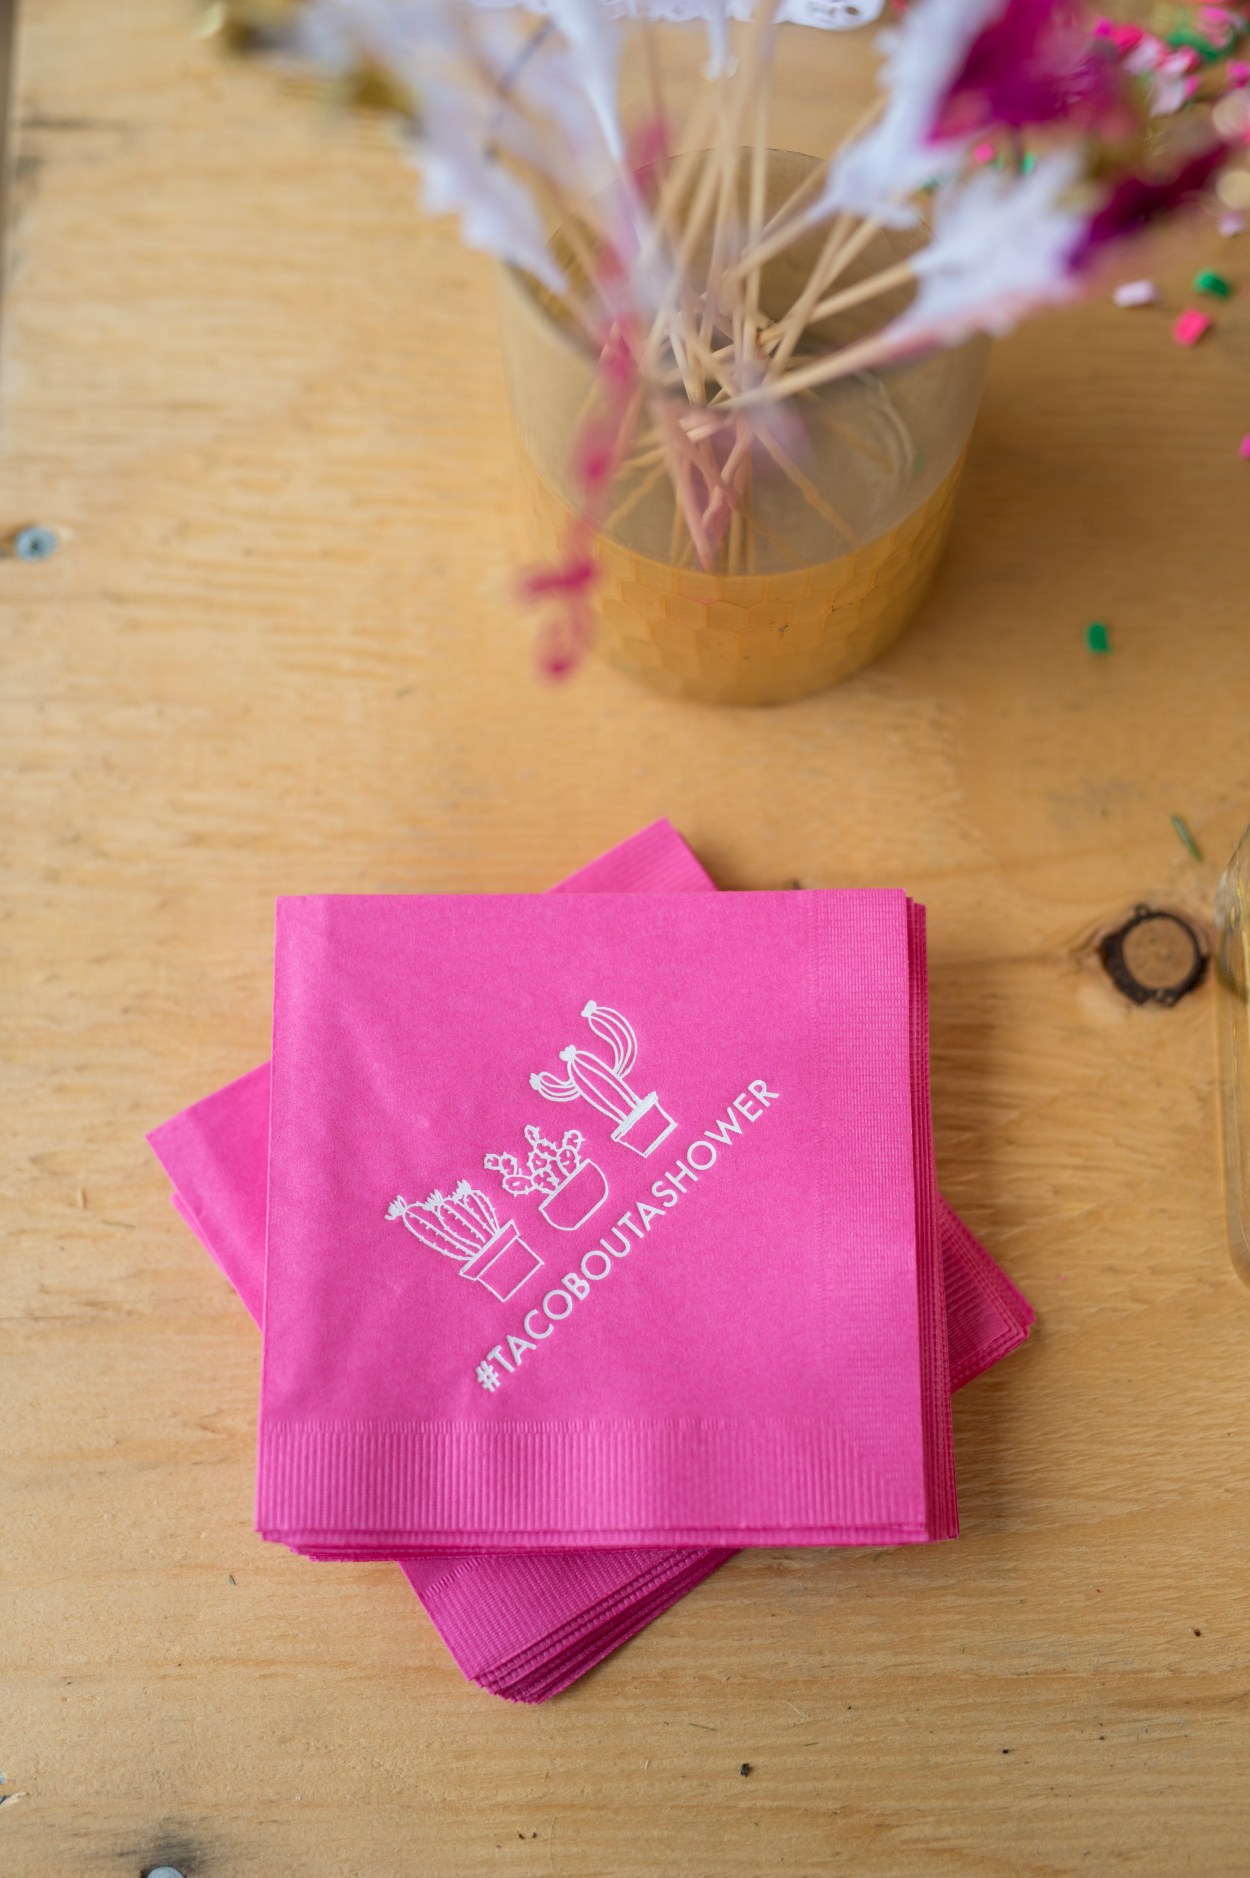 Taco bout a shower - cute cactus paper napkin for as elegant cinco de mayo themed bridal shower fiesta // Get inspired with these Elegant Mexican Fiesta / Cinco de Mayo Themed Bridal Shower Ideas. // mysweetengagement.com